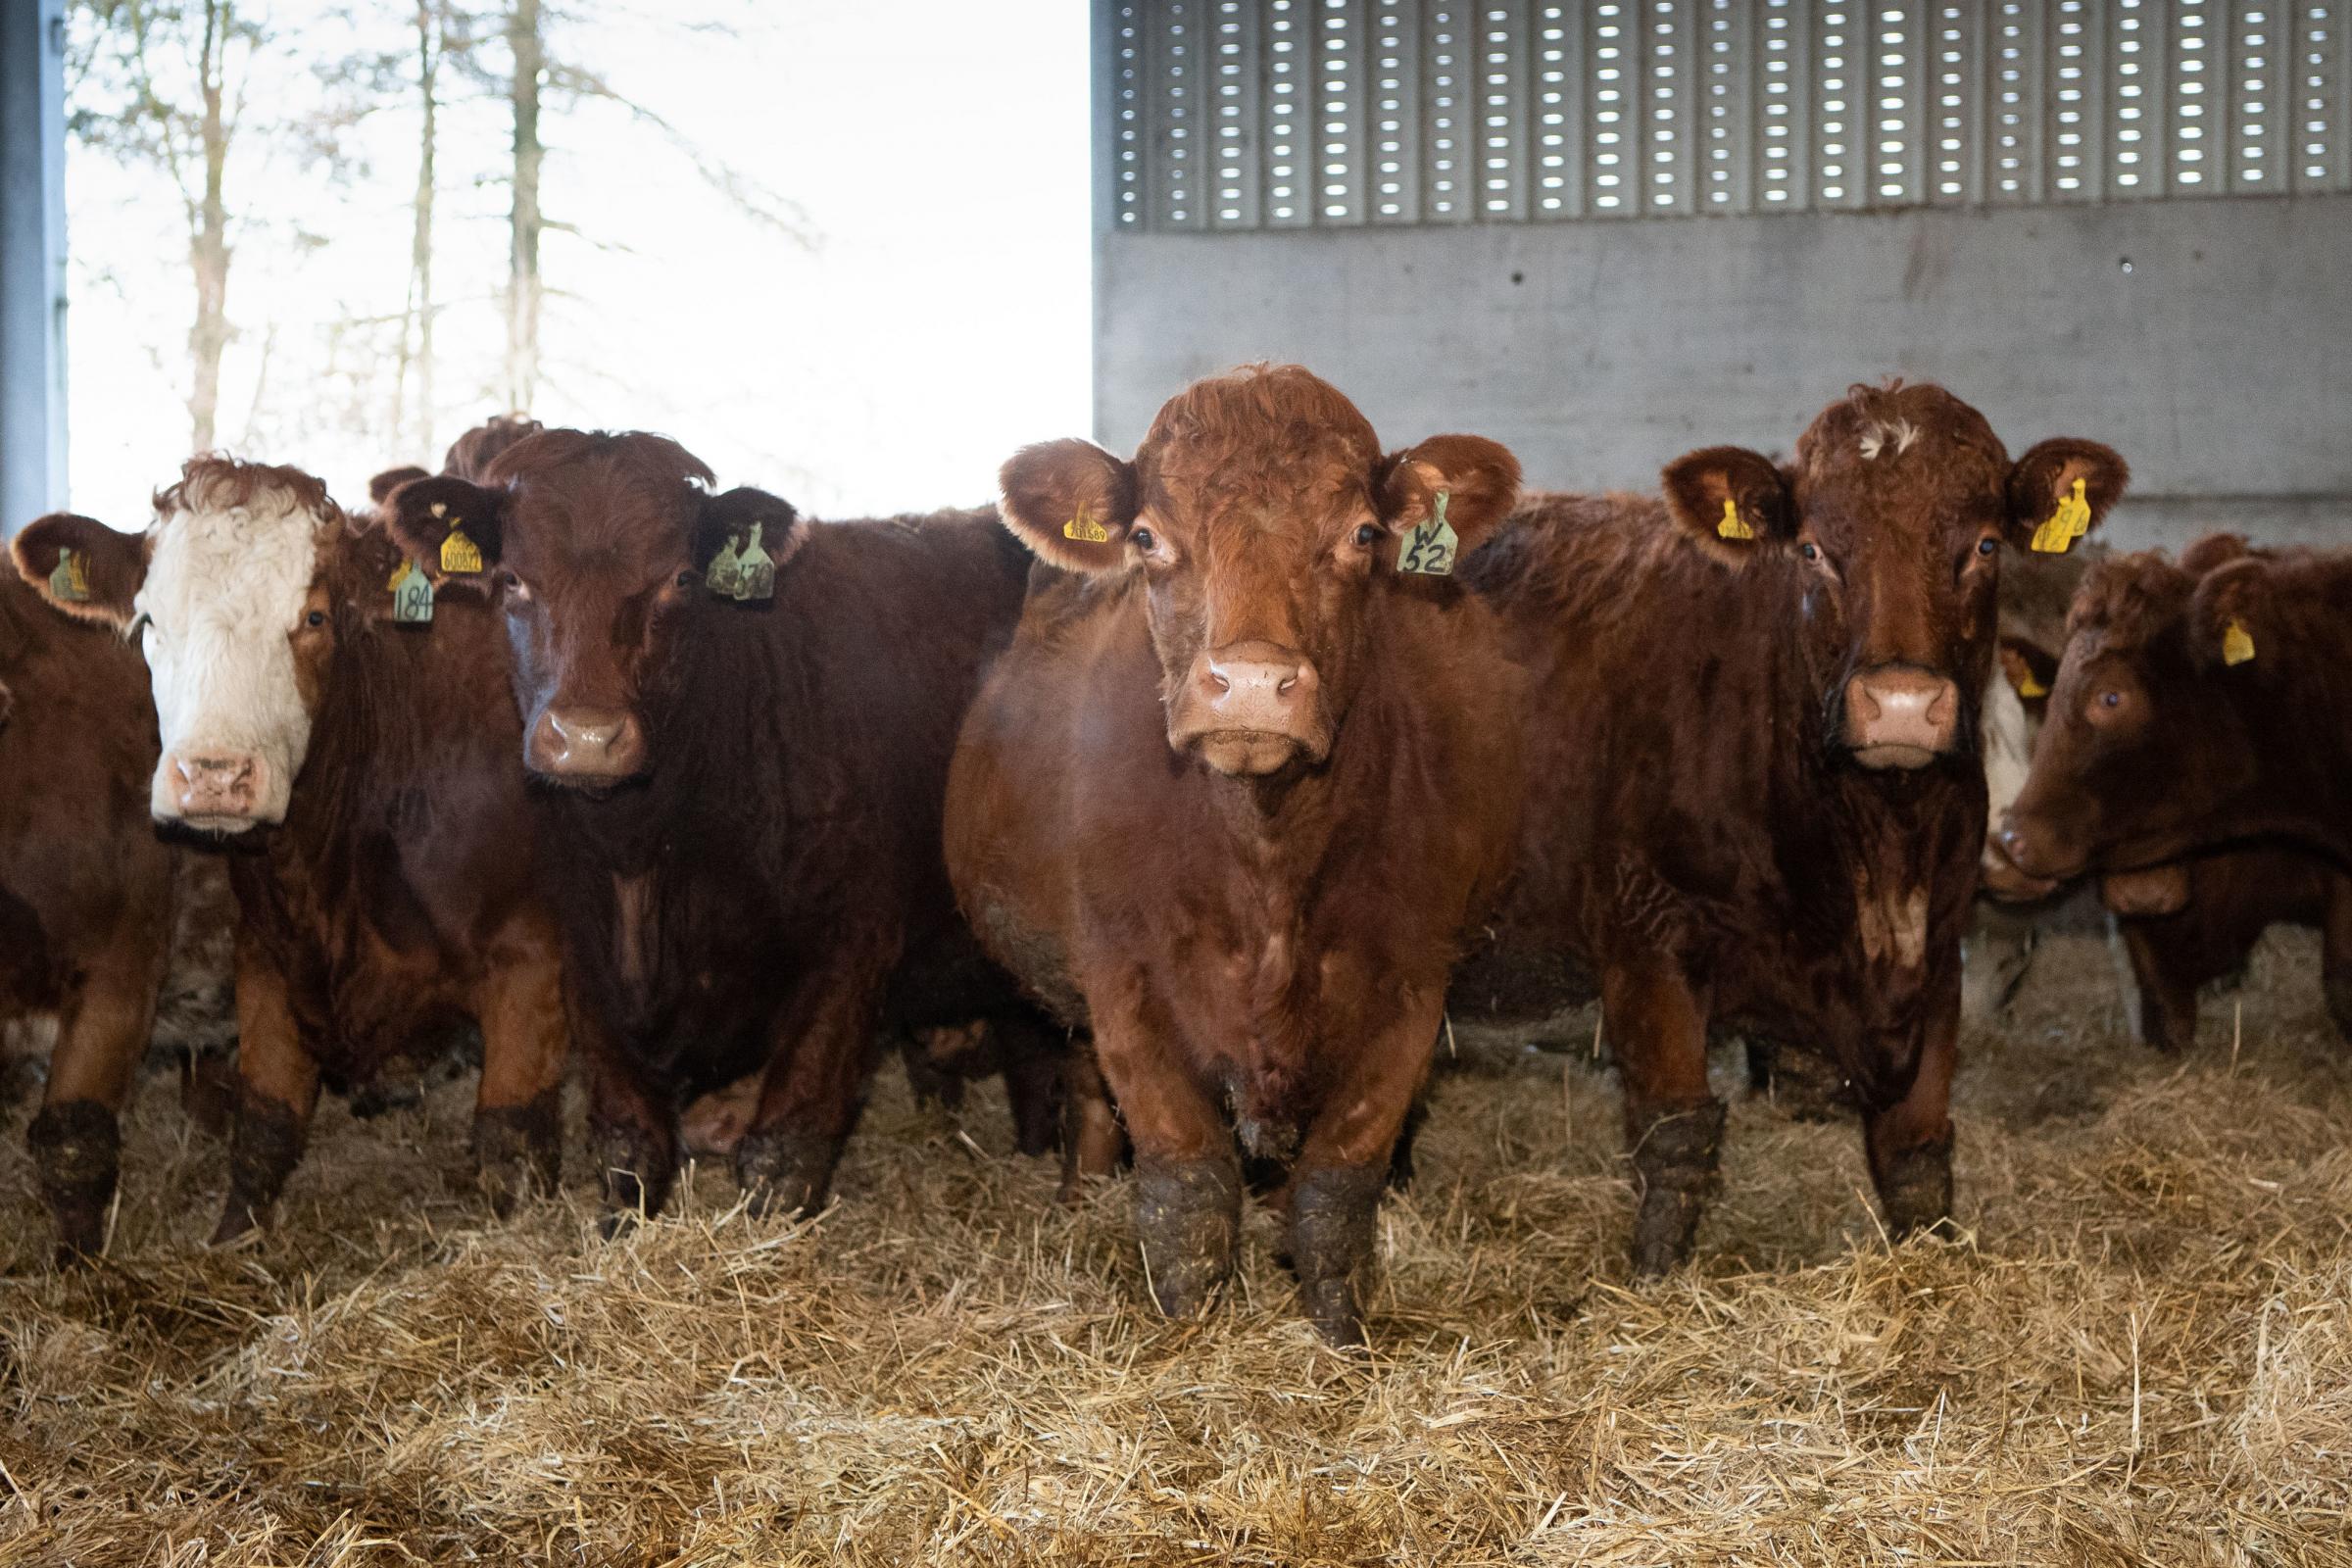  pure Luing females that in-calf to the Simmental bull and Sim-Luing cows that are in-calf to the Charolais Ref:RH210121215 Rob Haining / The Scottish Farmer...